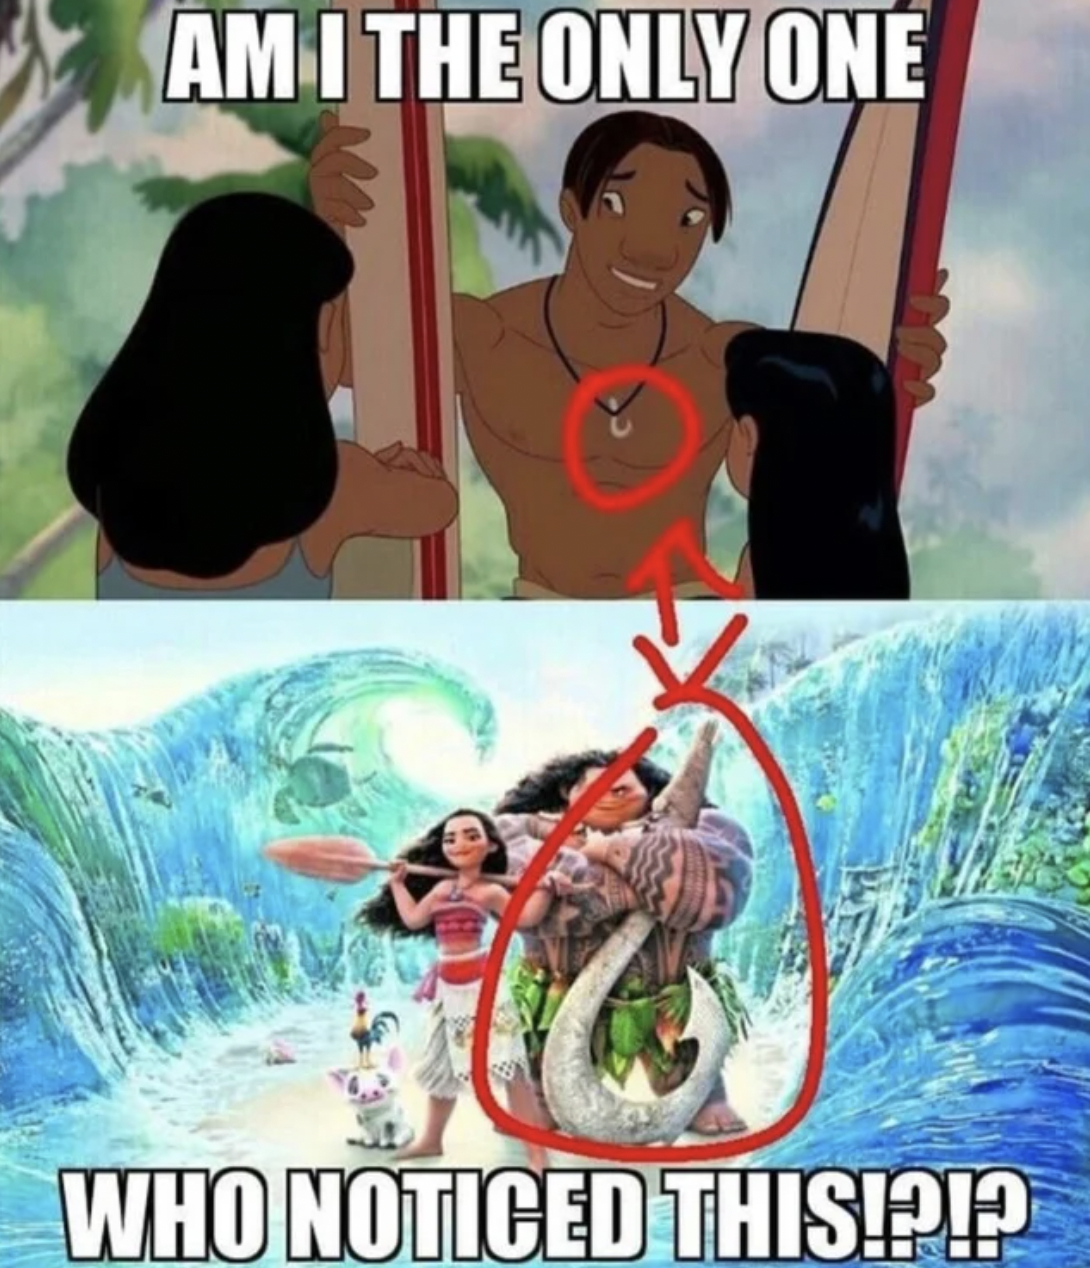 hate disney meme - Am I The Only One Who Noticed This!?!?